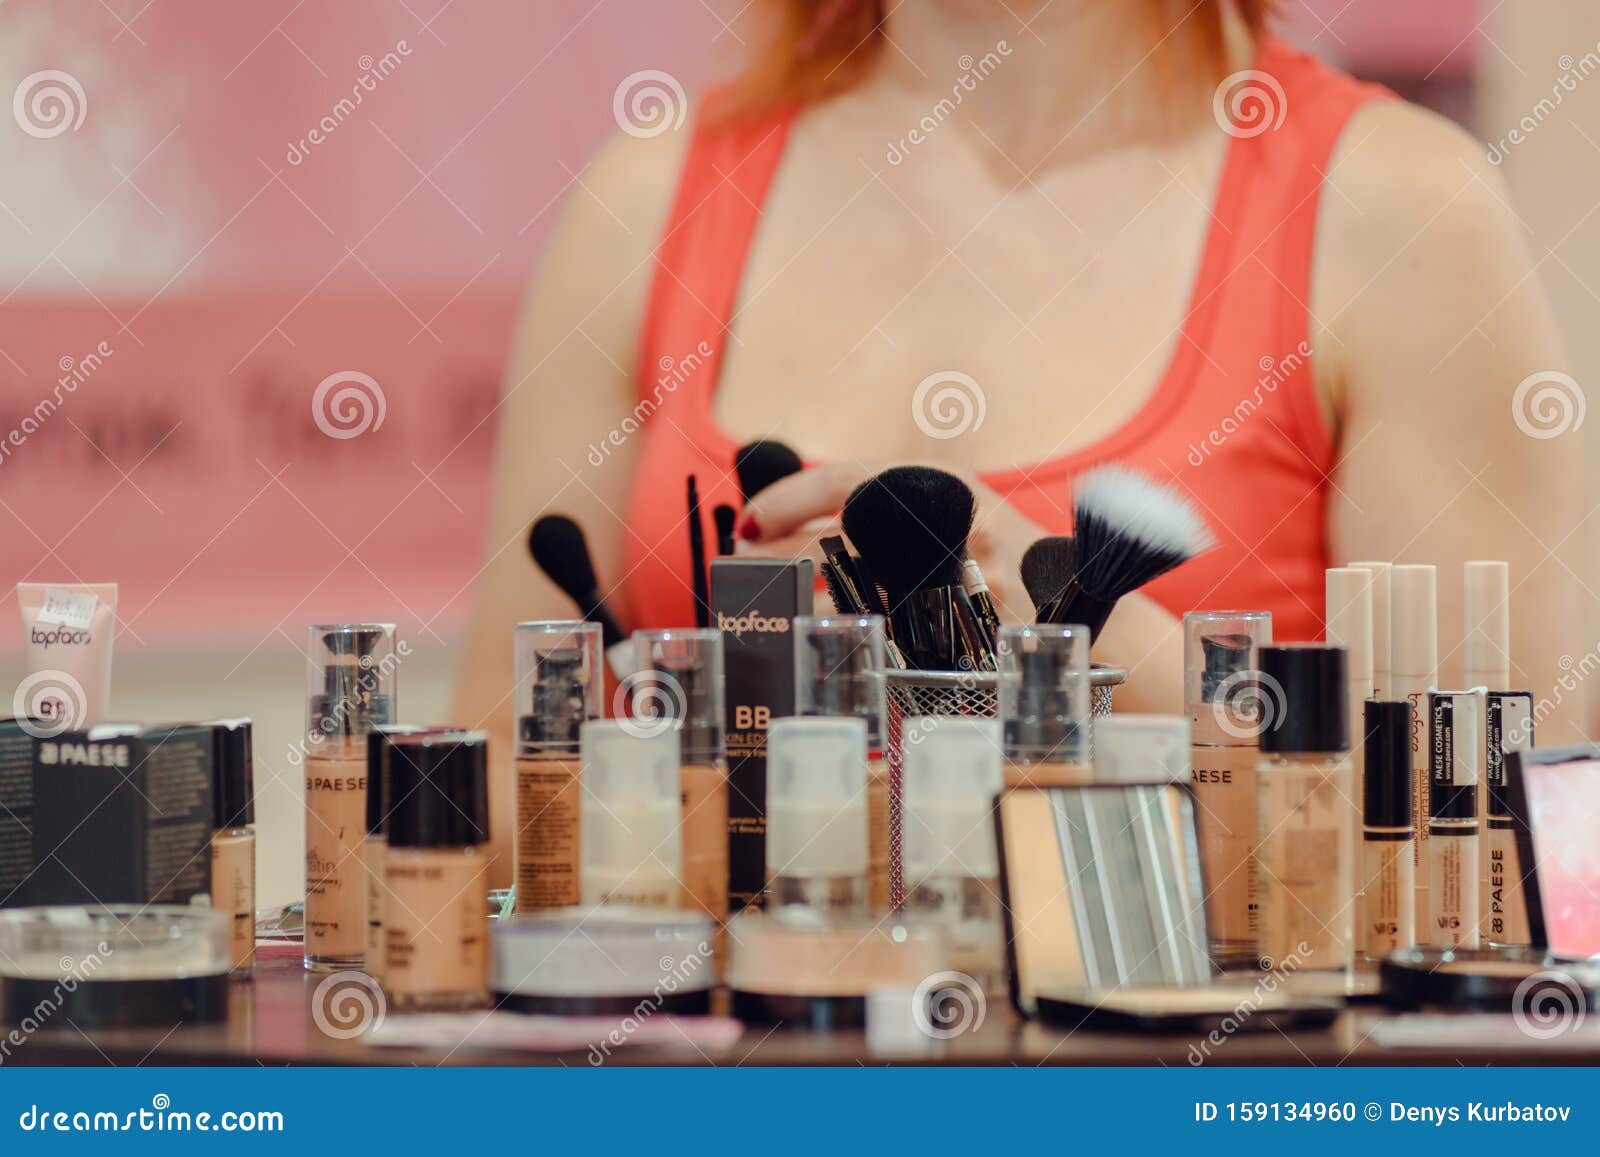 Beauty Consultant with Products Editorial Image - Image of hygiene